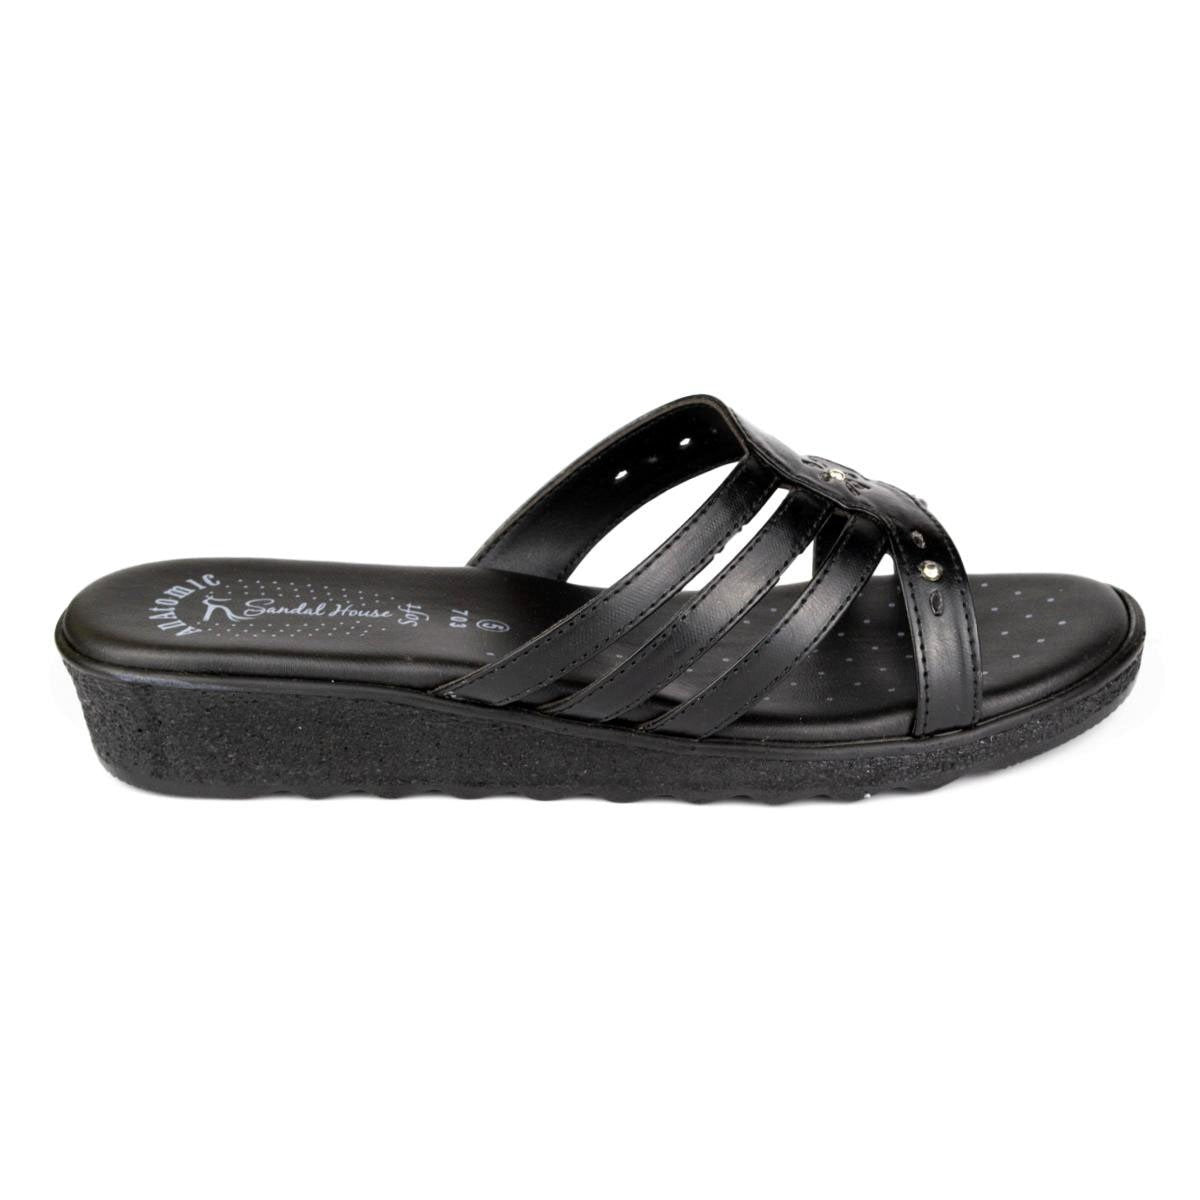 Womens Low Wedge Casual Sandal - Watney Shoes 